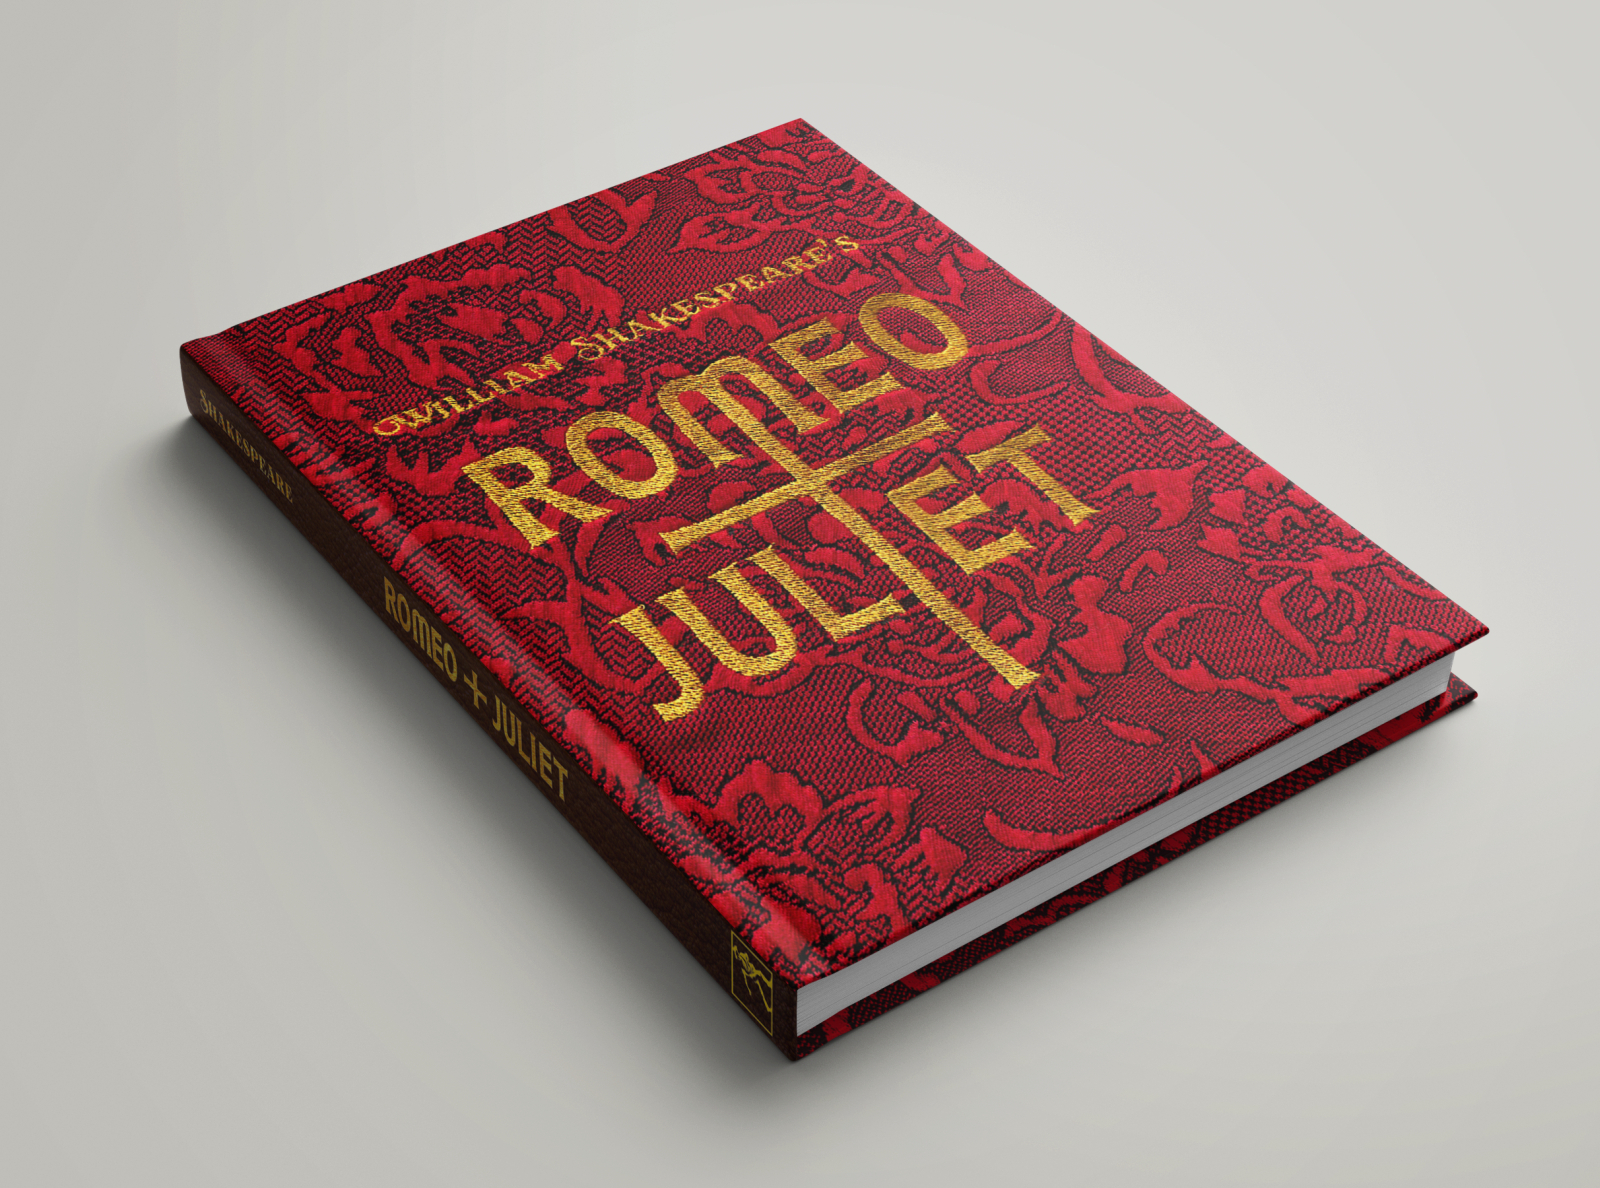 Romeo and Juliet book design in the modern world by Anastasiia on Dribbble